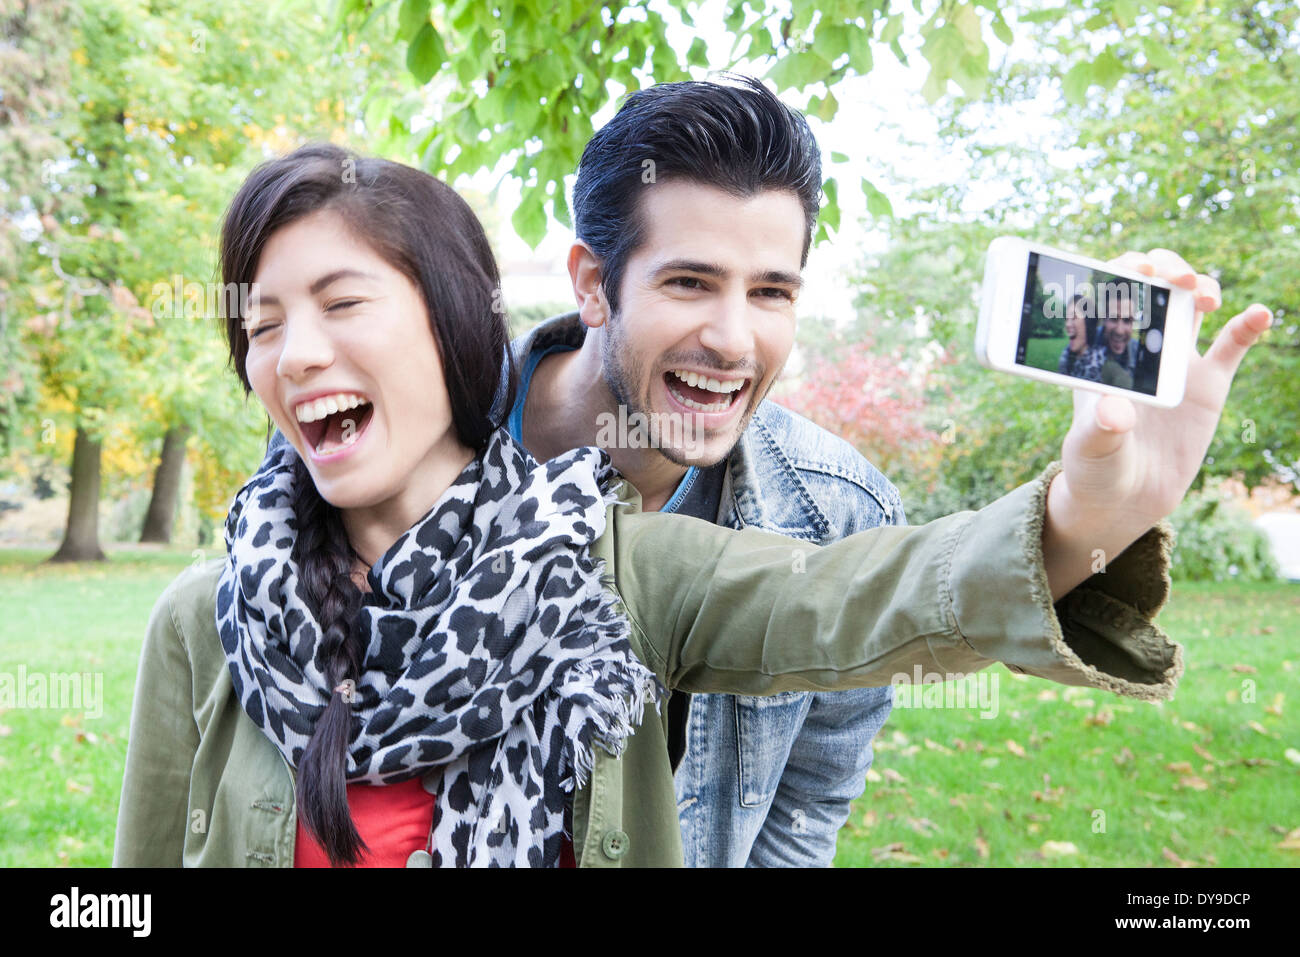 Couple taking self portrait with smartphone Stock Photo